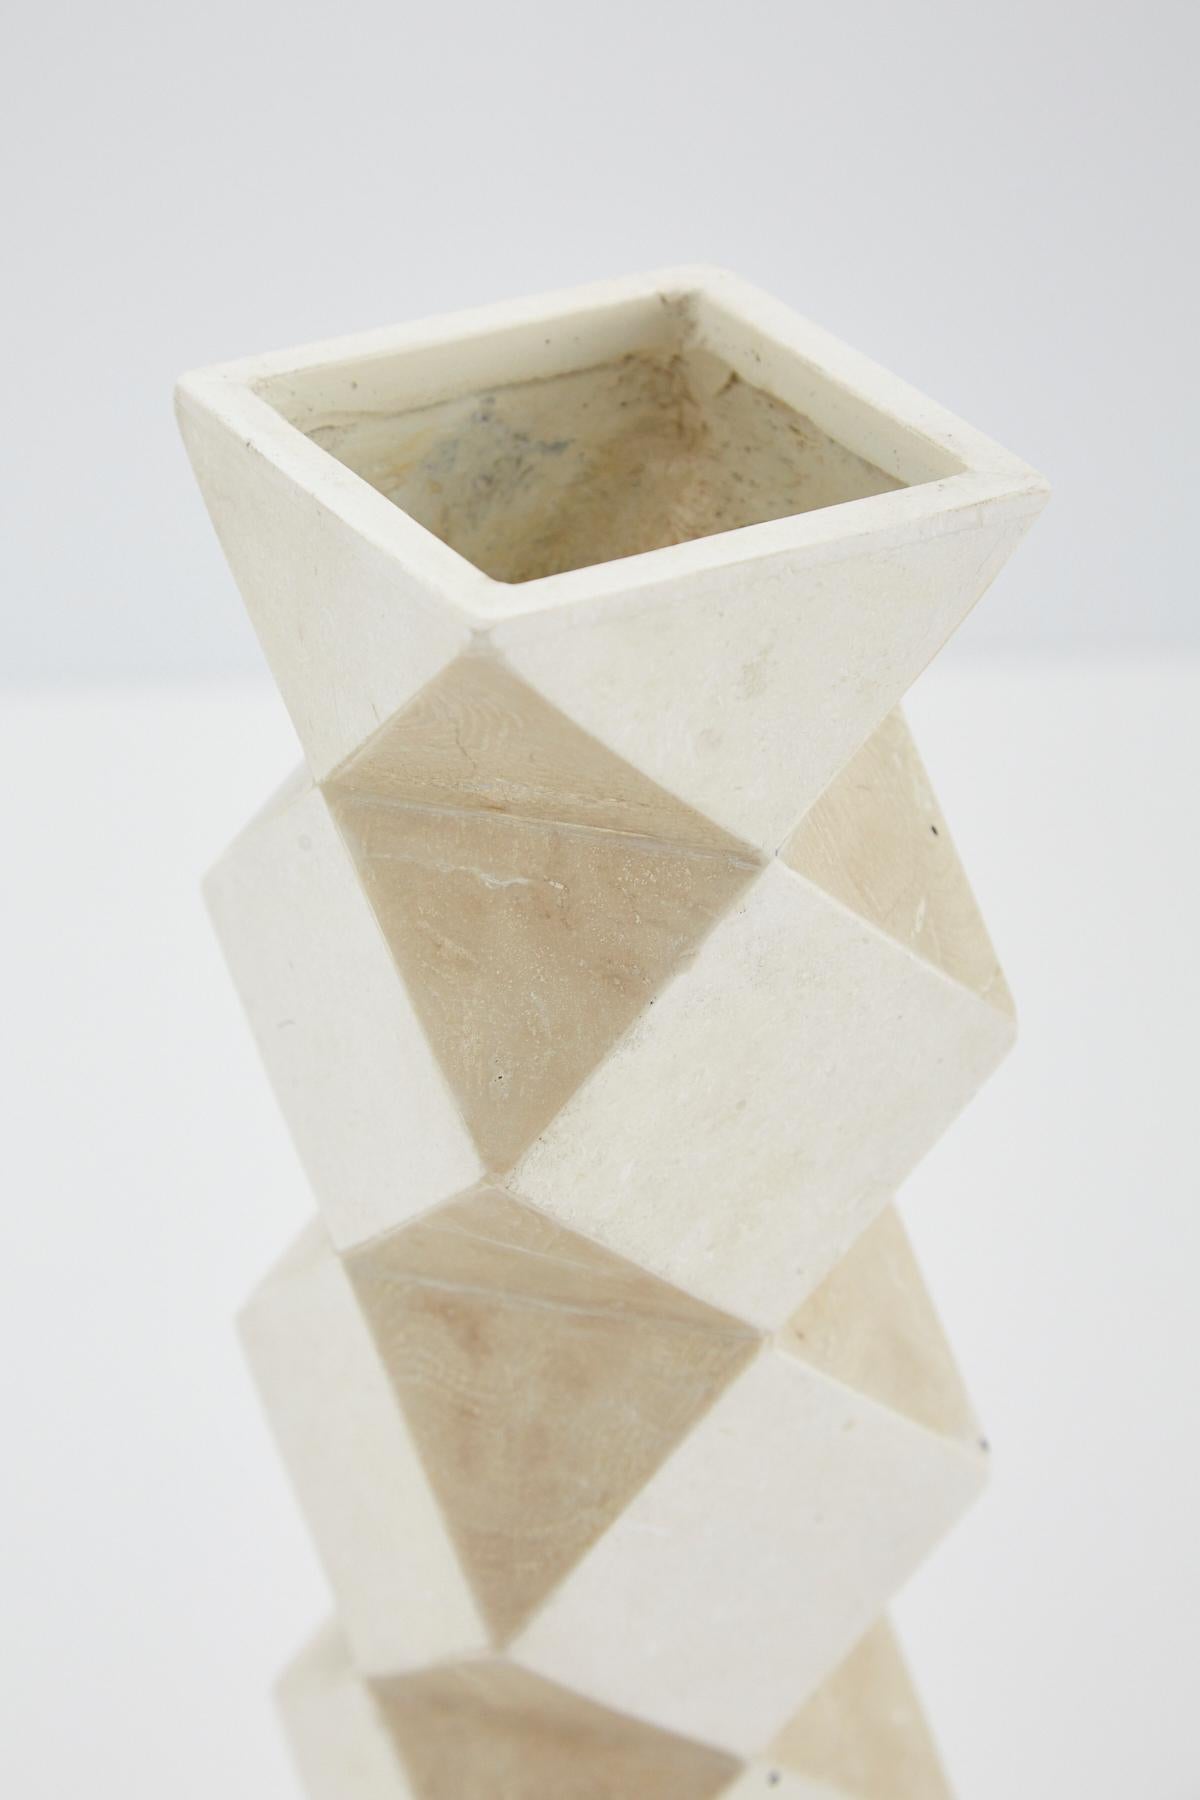 Tall Convertible Faceted Postmodern Tessellated Stone Candlestick or Vase, 1990s (Stein) im Angebot